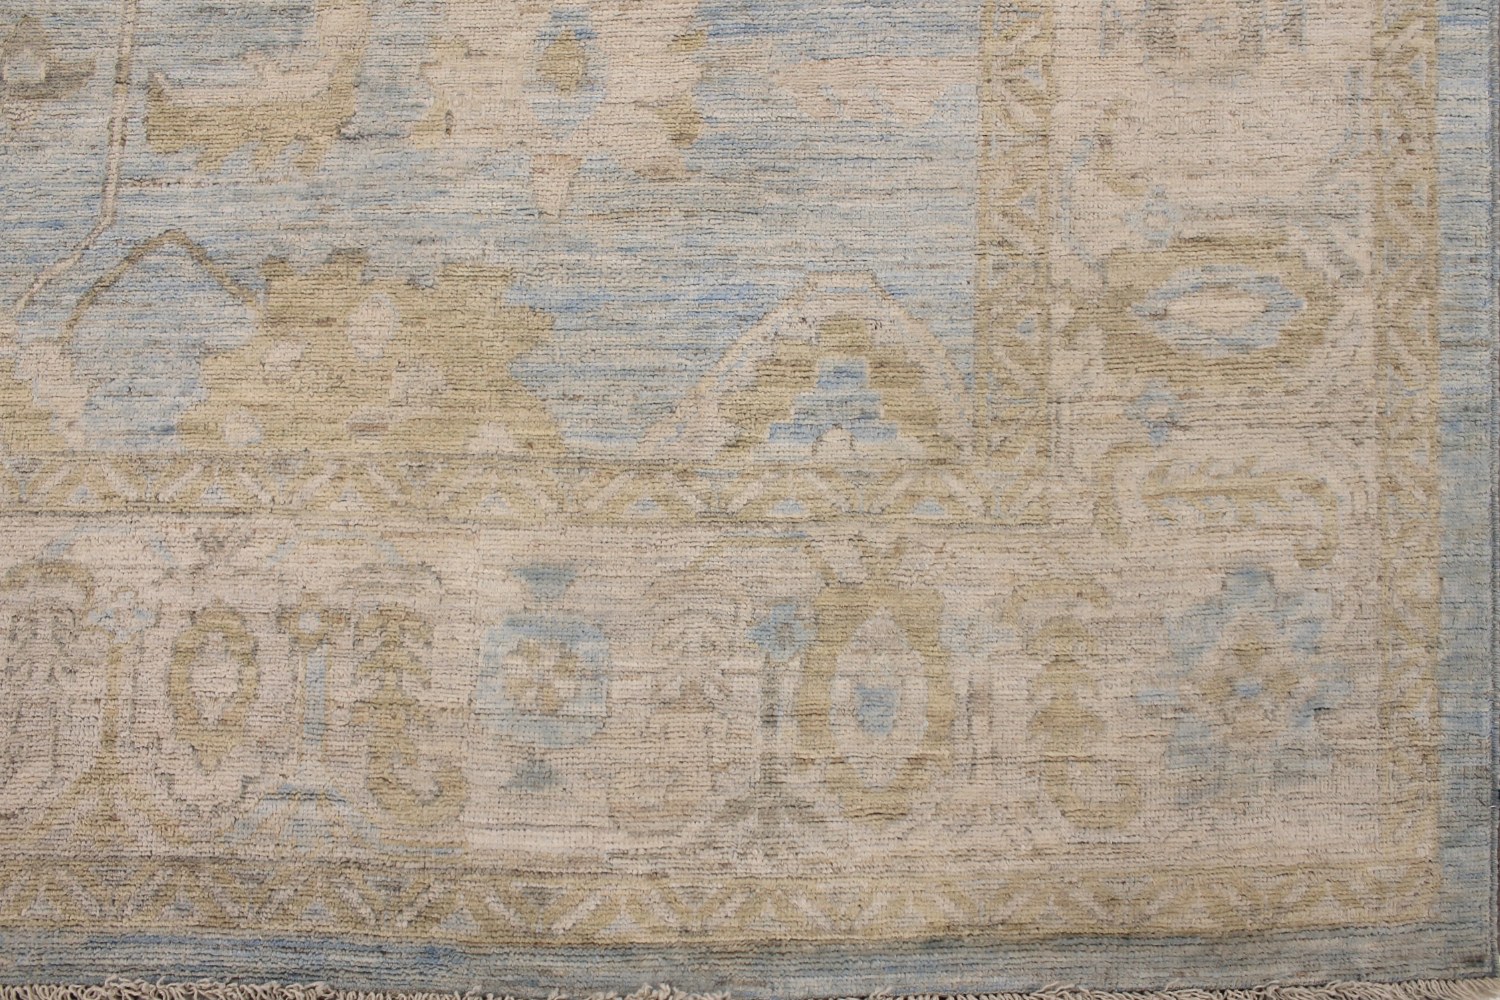 9x12 Oushak Hand Knotted Wool Area Rug - MR028091